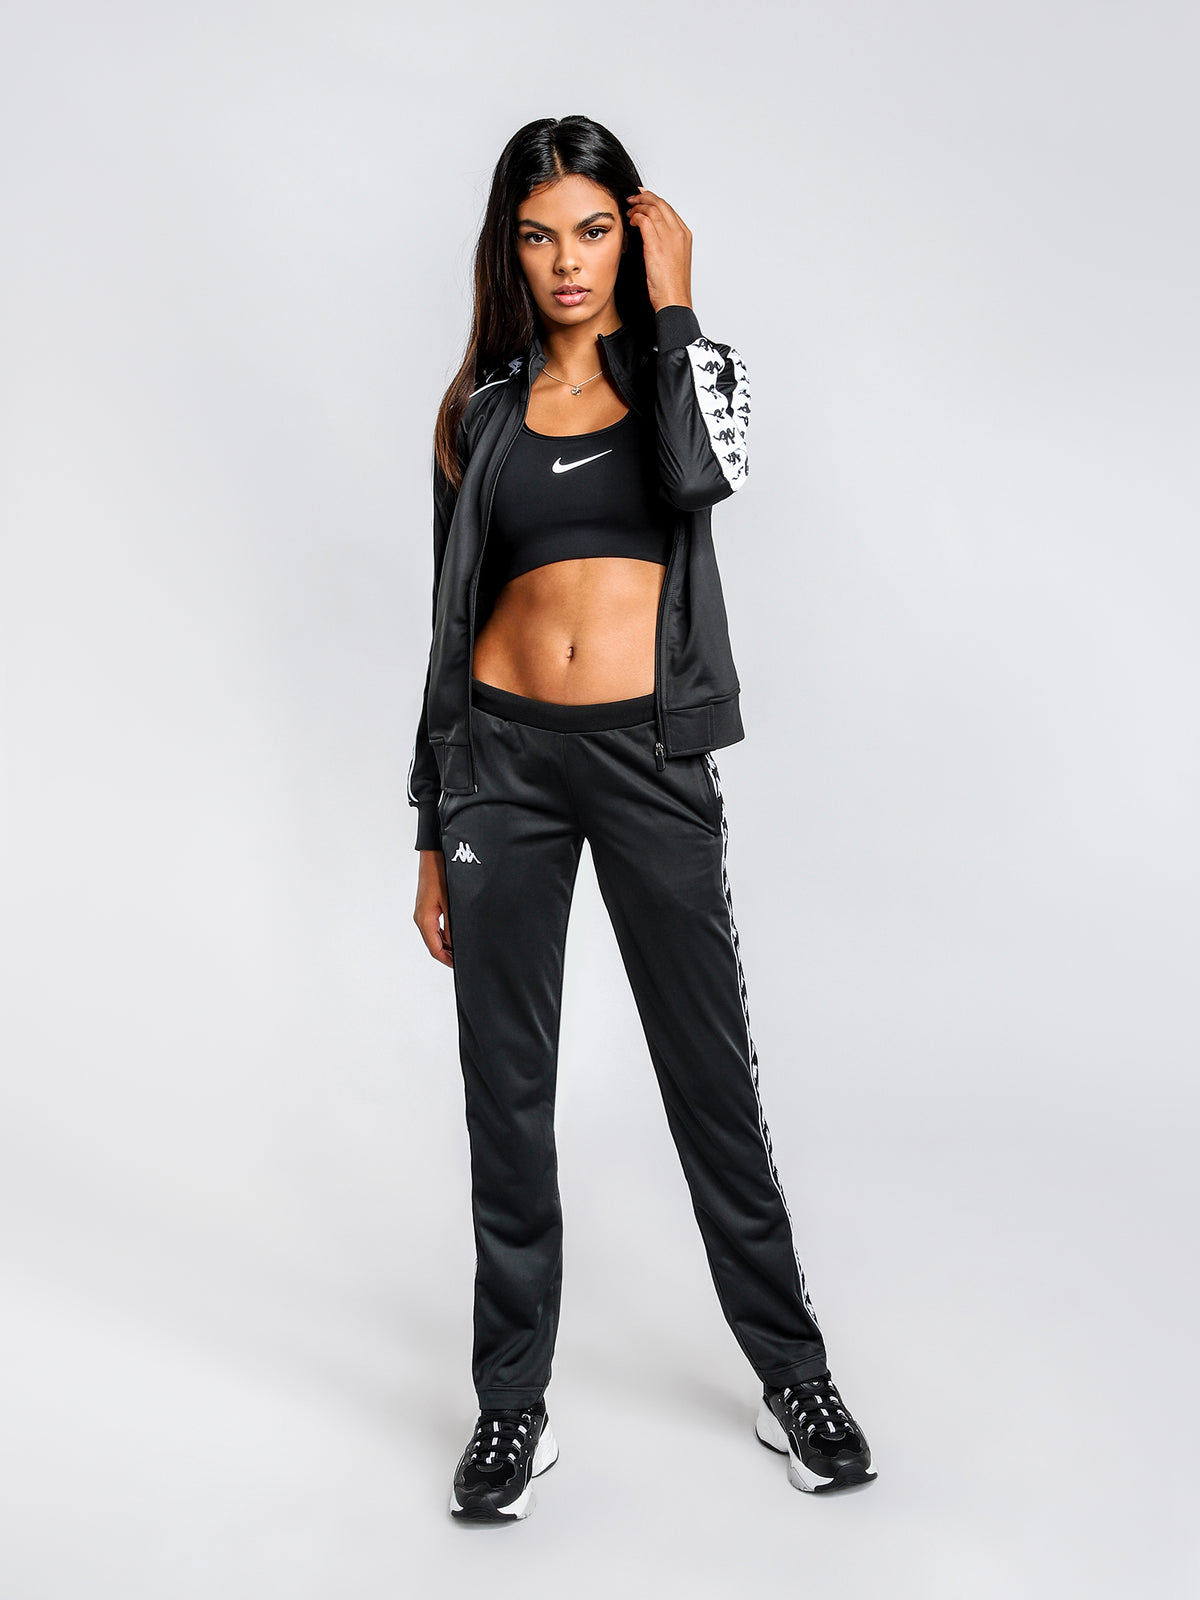 222 Banda Wastor Track Pants in Black and White